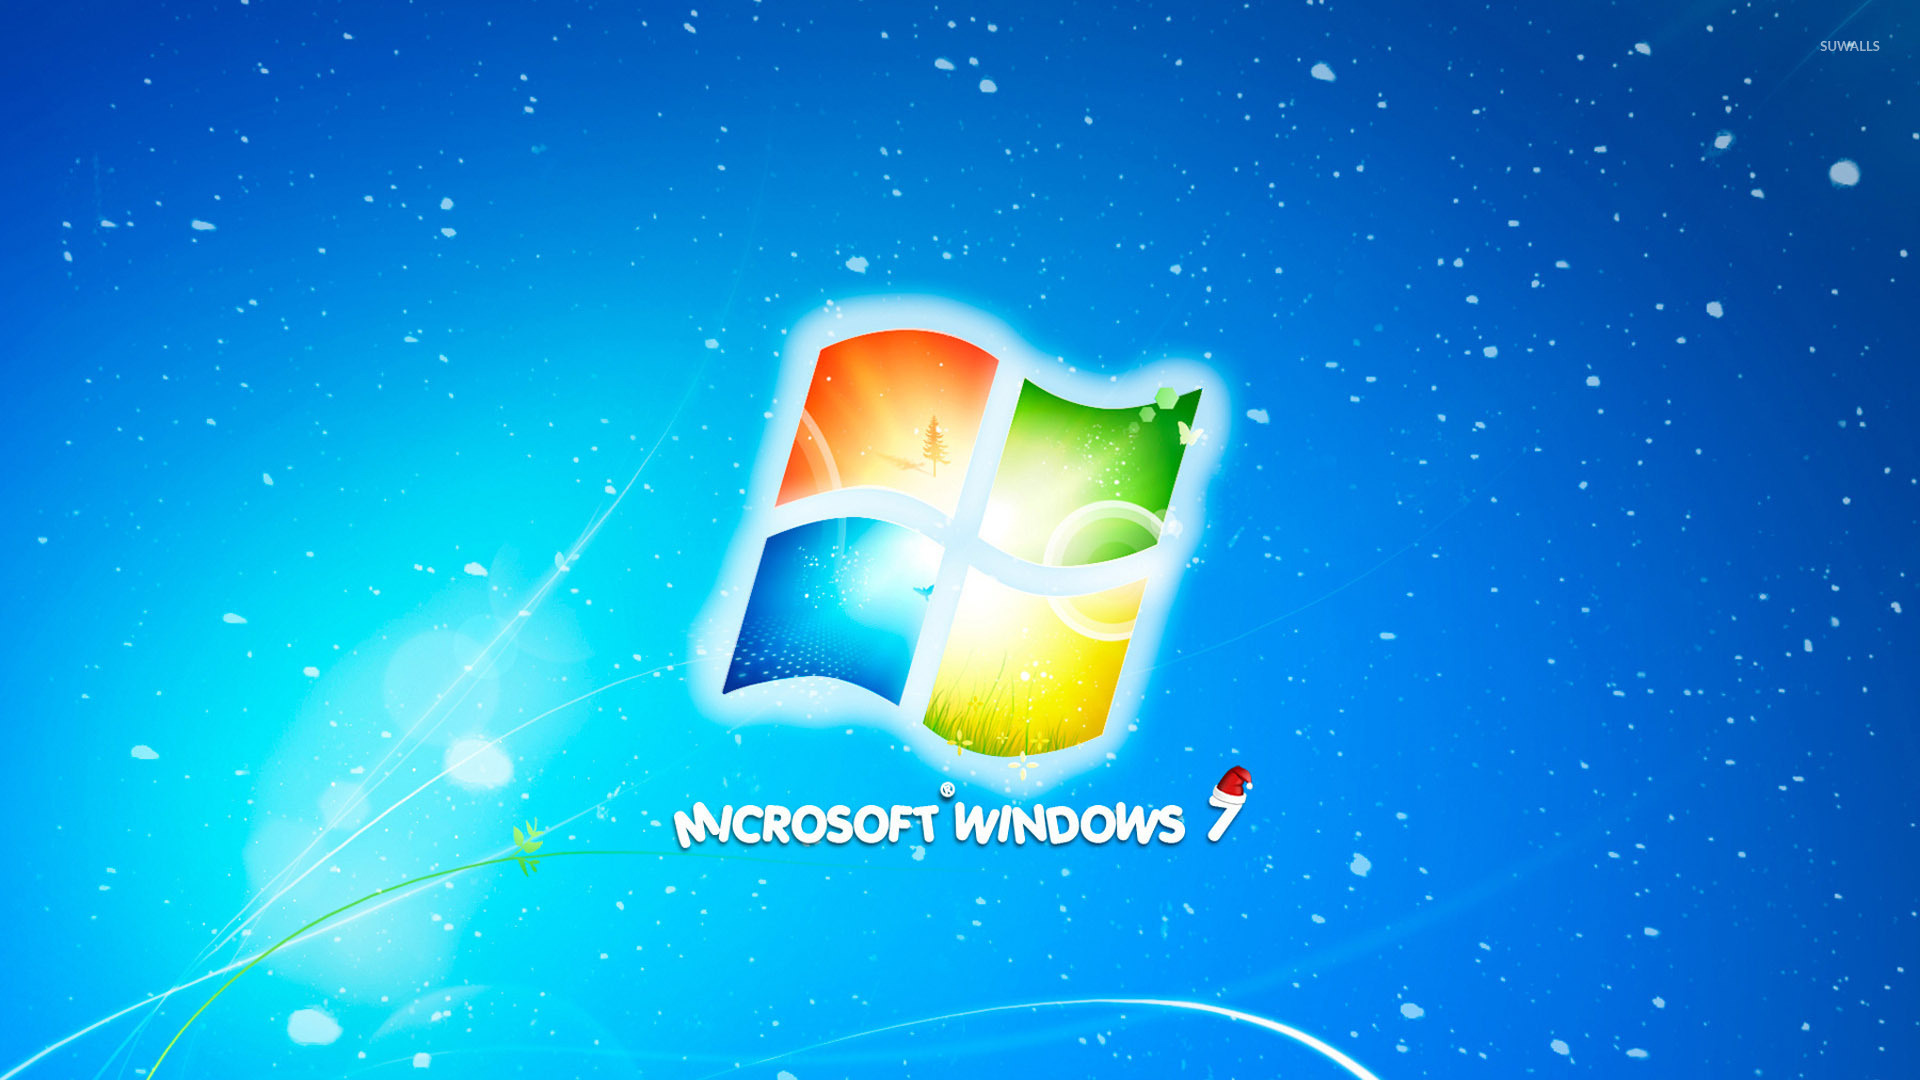 Christmas with Windows 7 wallpaper - Computer wallpapers - #51192